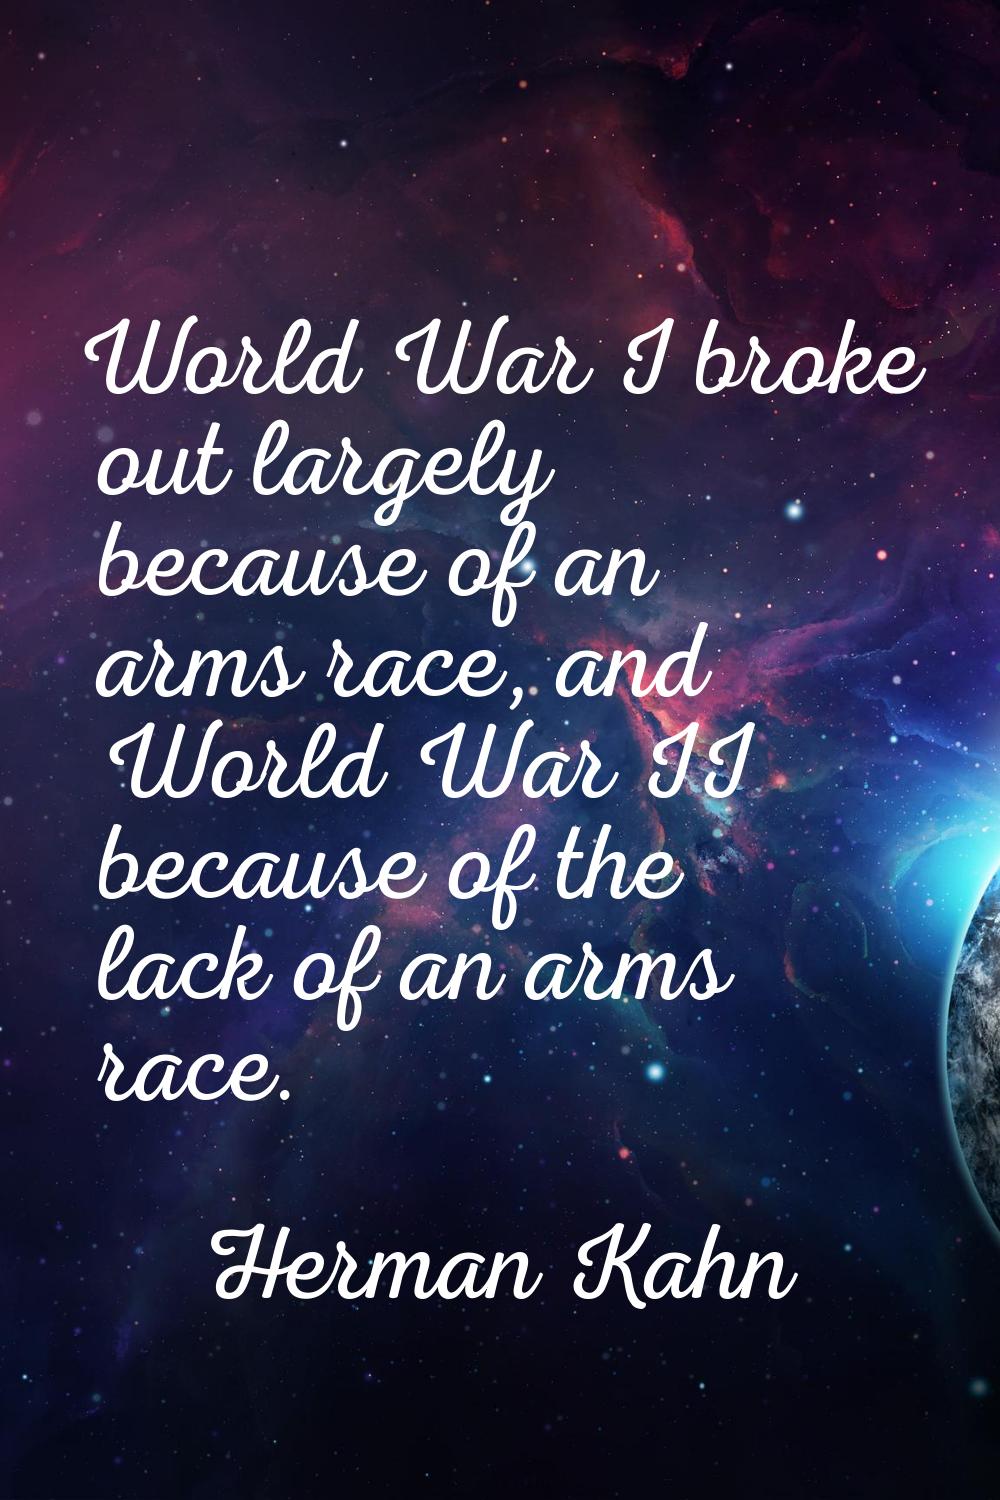 World War I broke out largely because of an arms race, and World War II because of the lack of an a